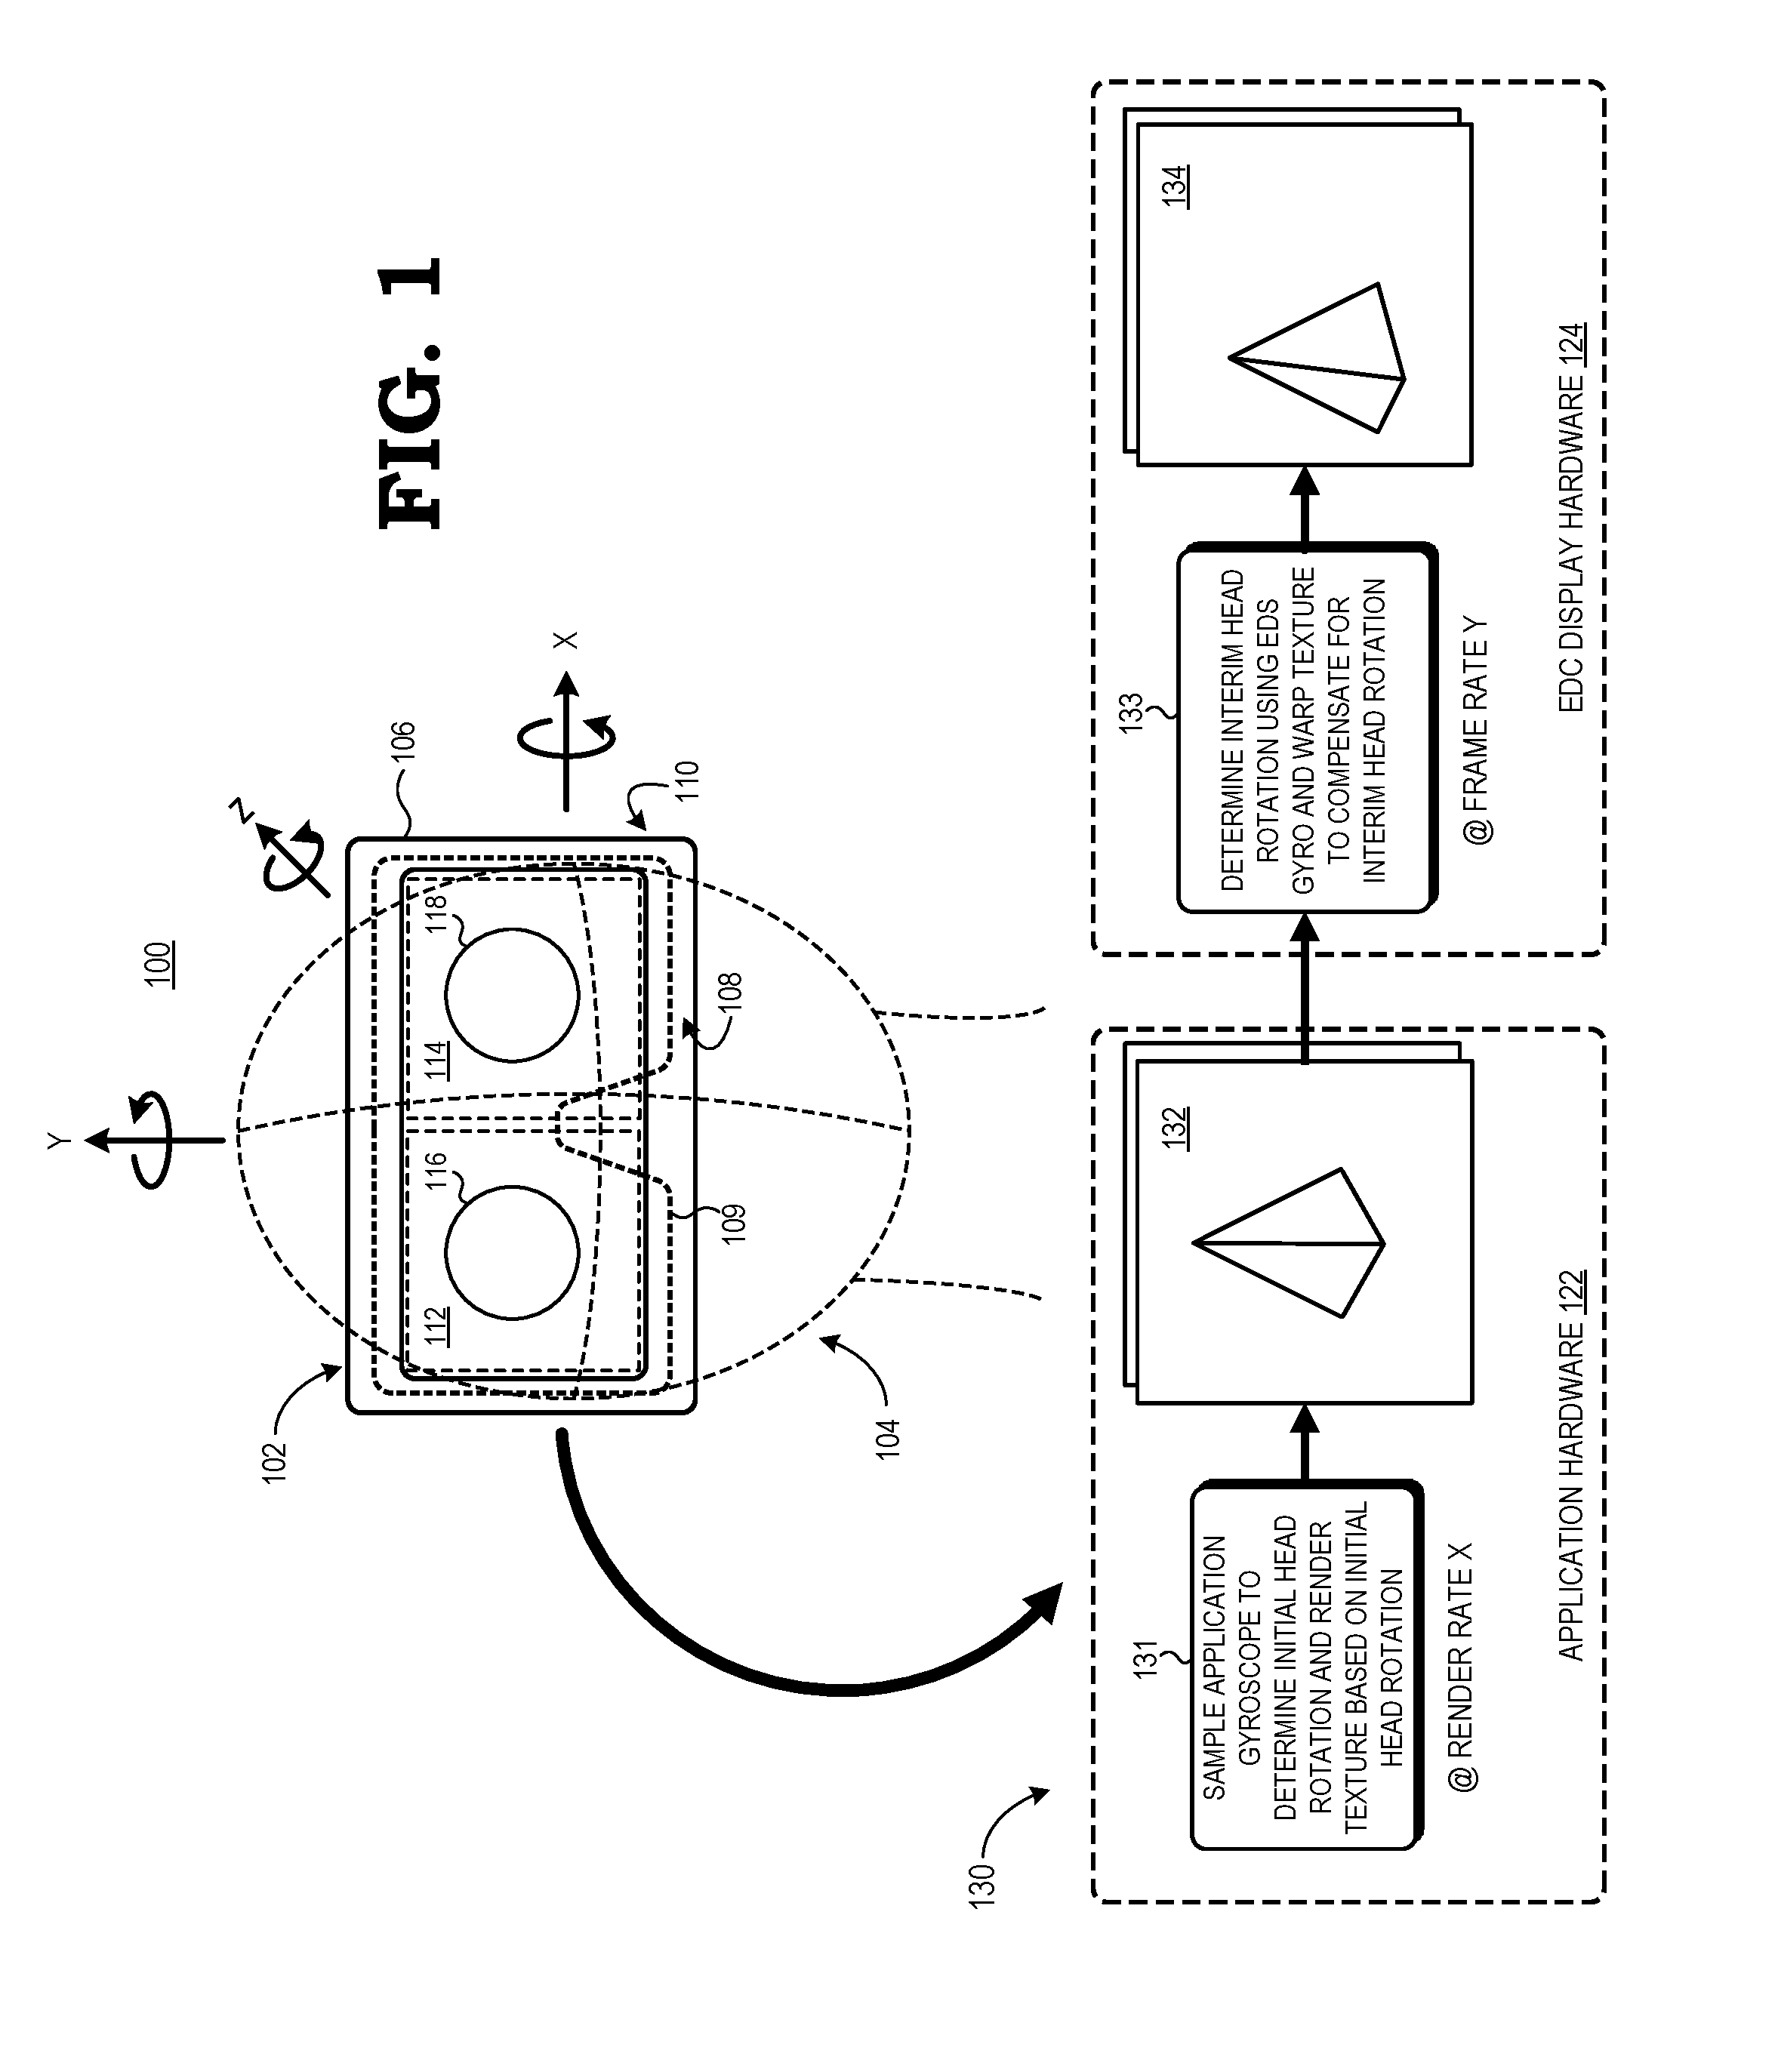 Electronic display stabilization for head mounted display